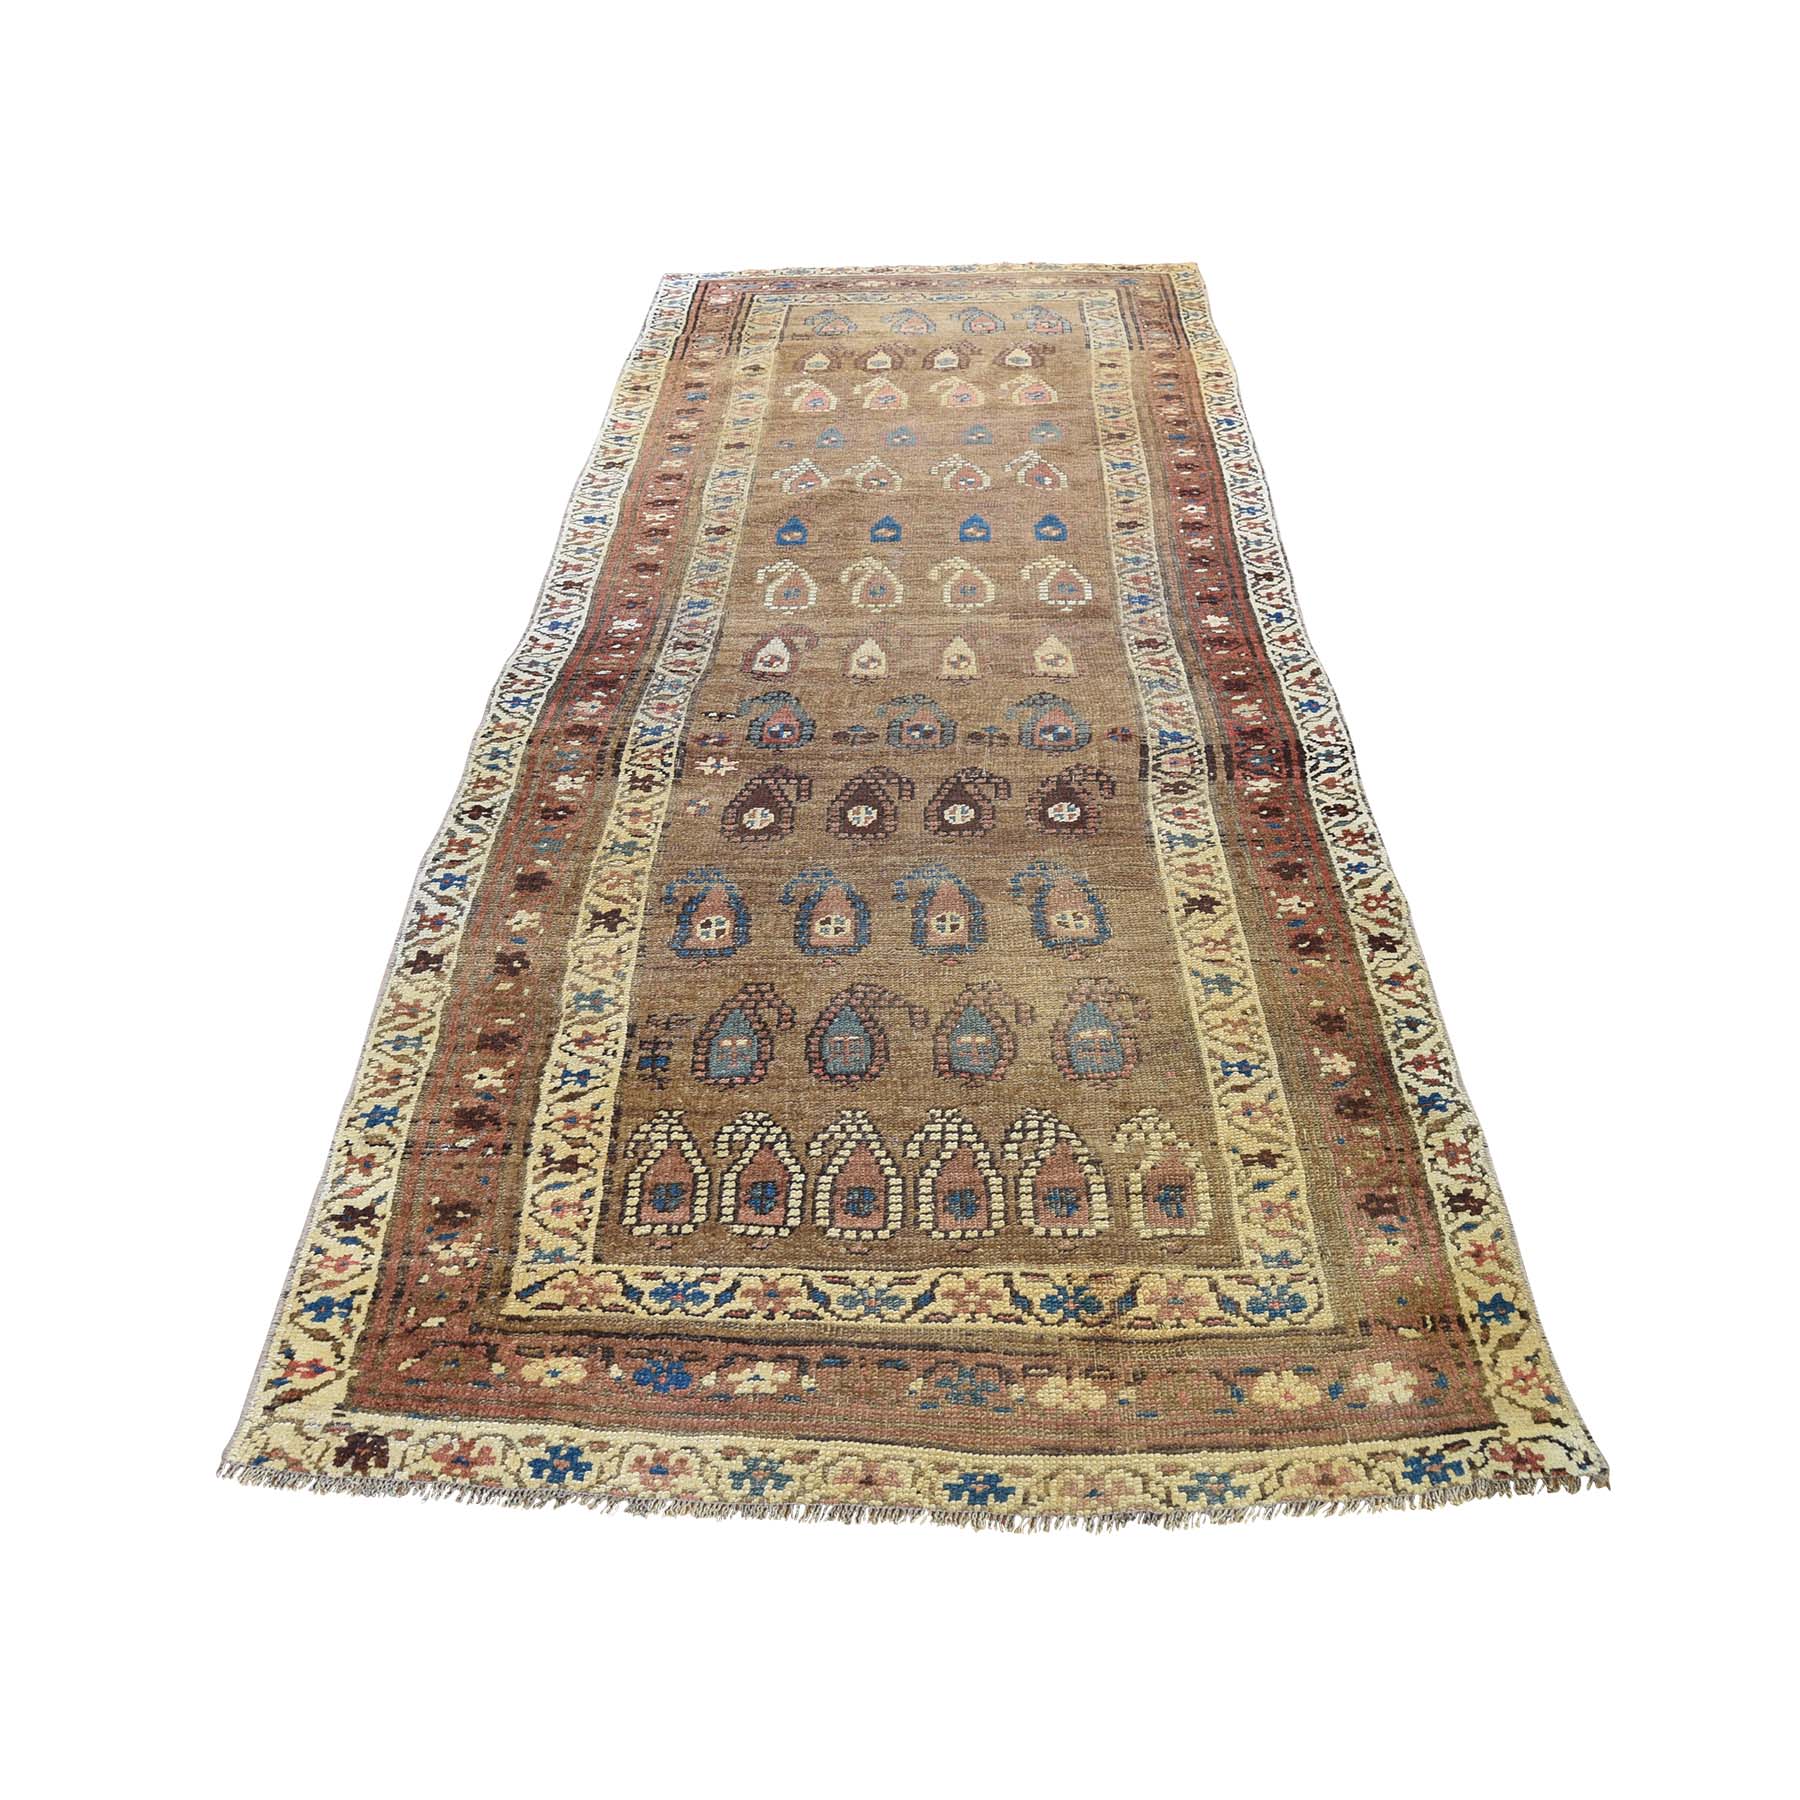 3'9"x10'7" Antique Persian North West Boteh Design Camel Hair Wide Runner Hand Woven Oriental Rug 